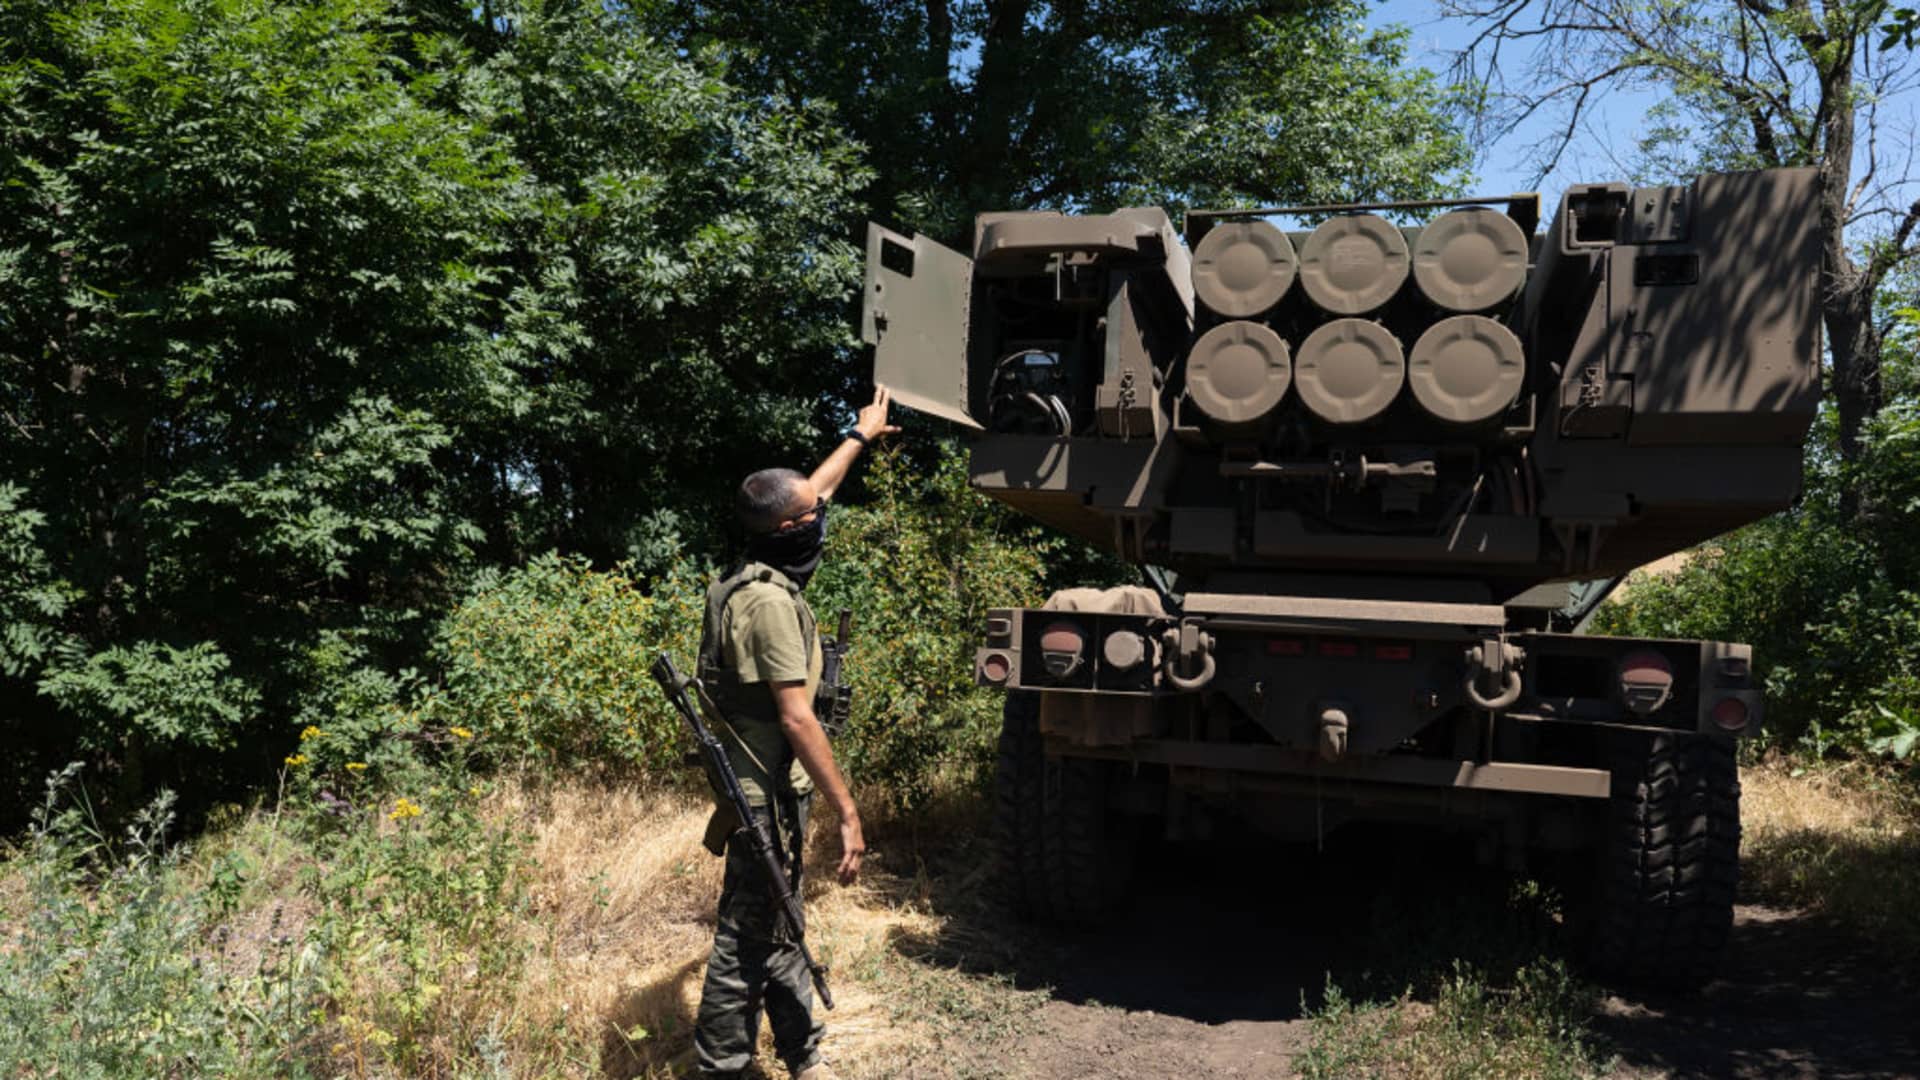 A Ukrainian army unit shows the rockets on HIMARS vehicle in eastern Ukraine on July 1, 2022.